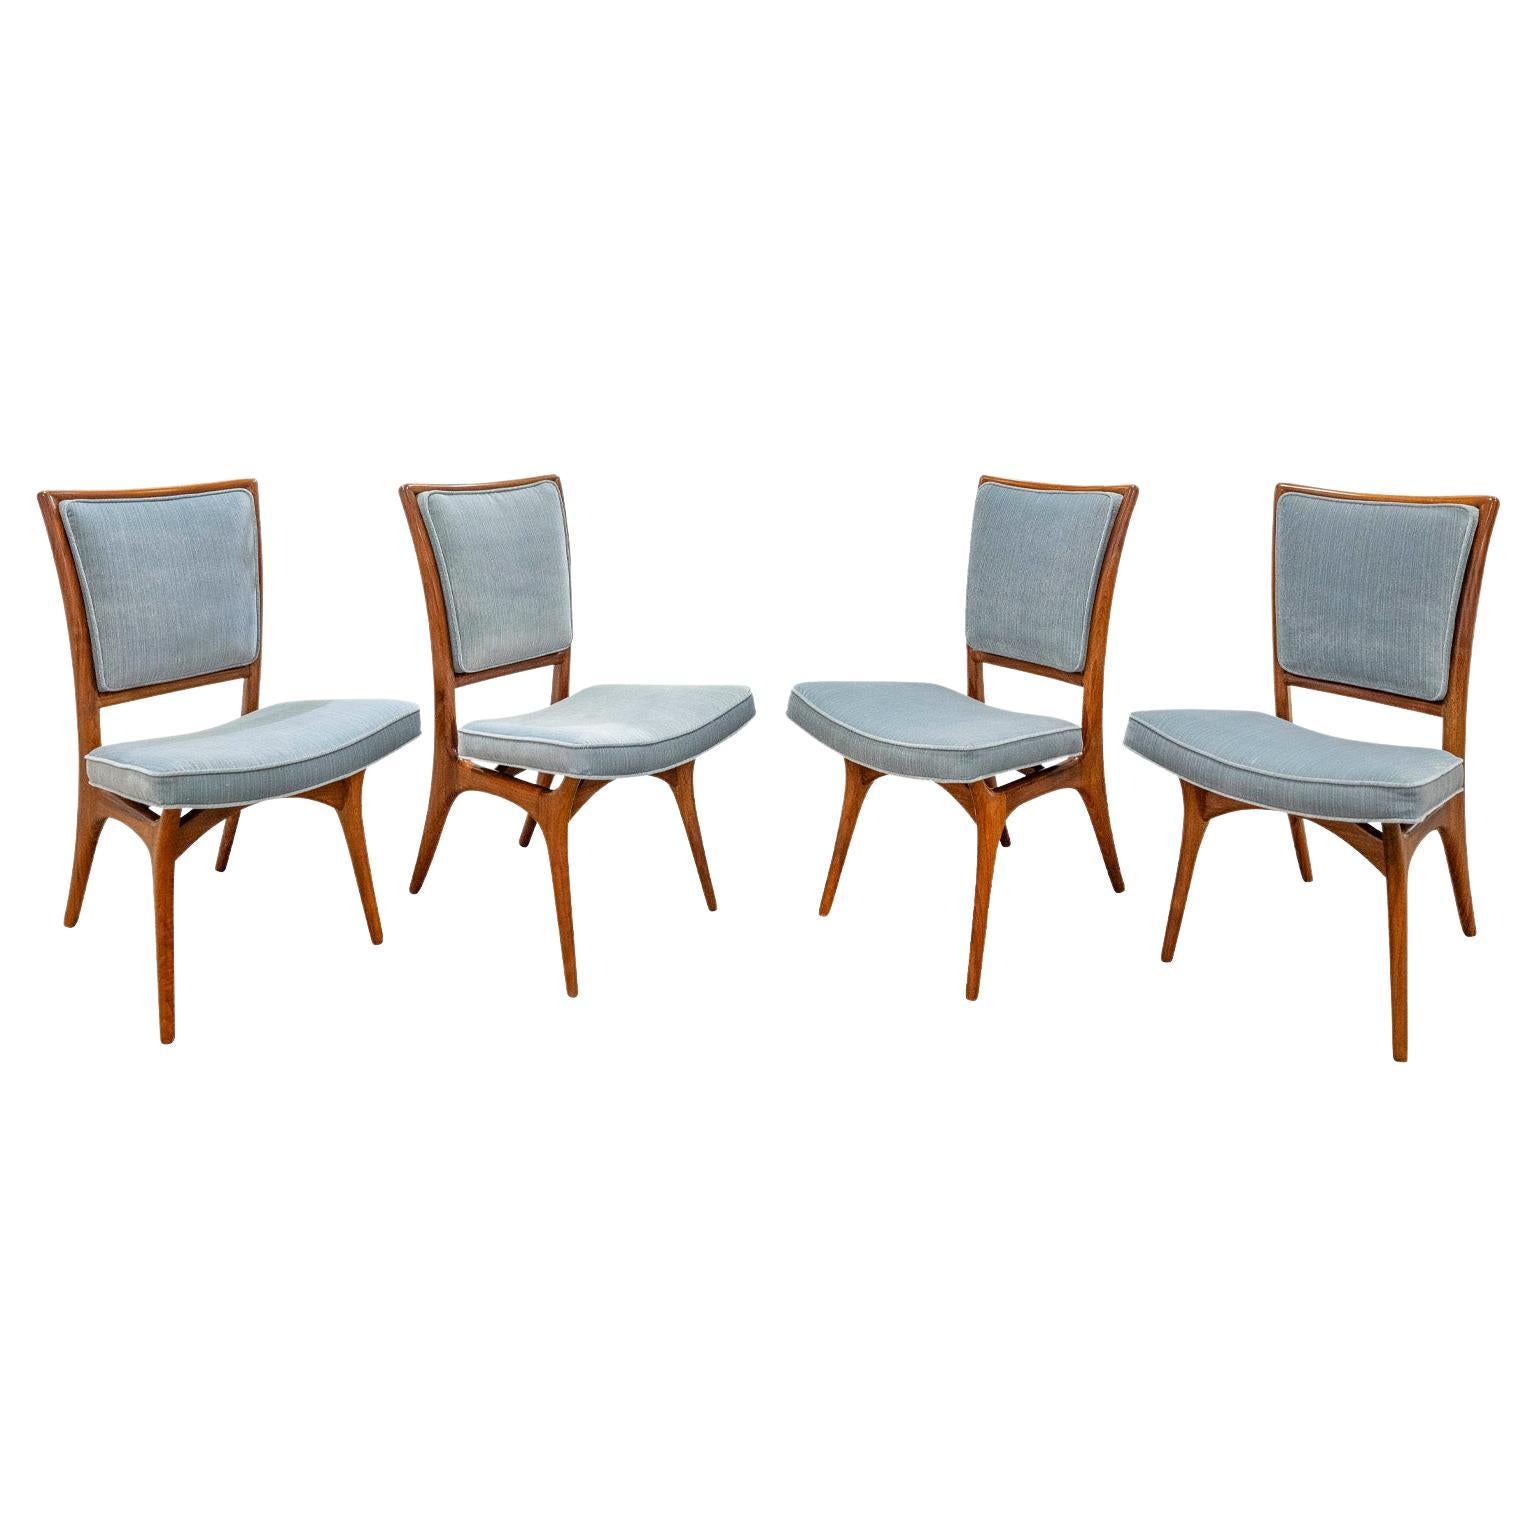 Vladimir Kagan Rare Iconic Set of 4 Sculpted Walnut Dining/Game Chairs 1950s